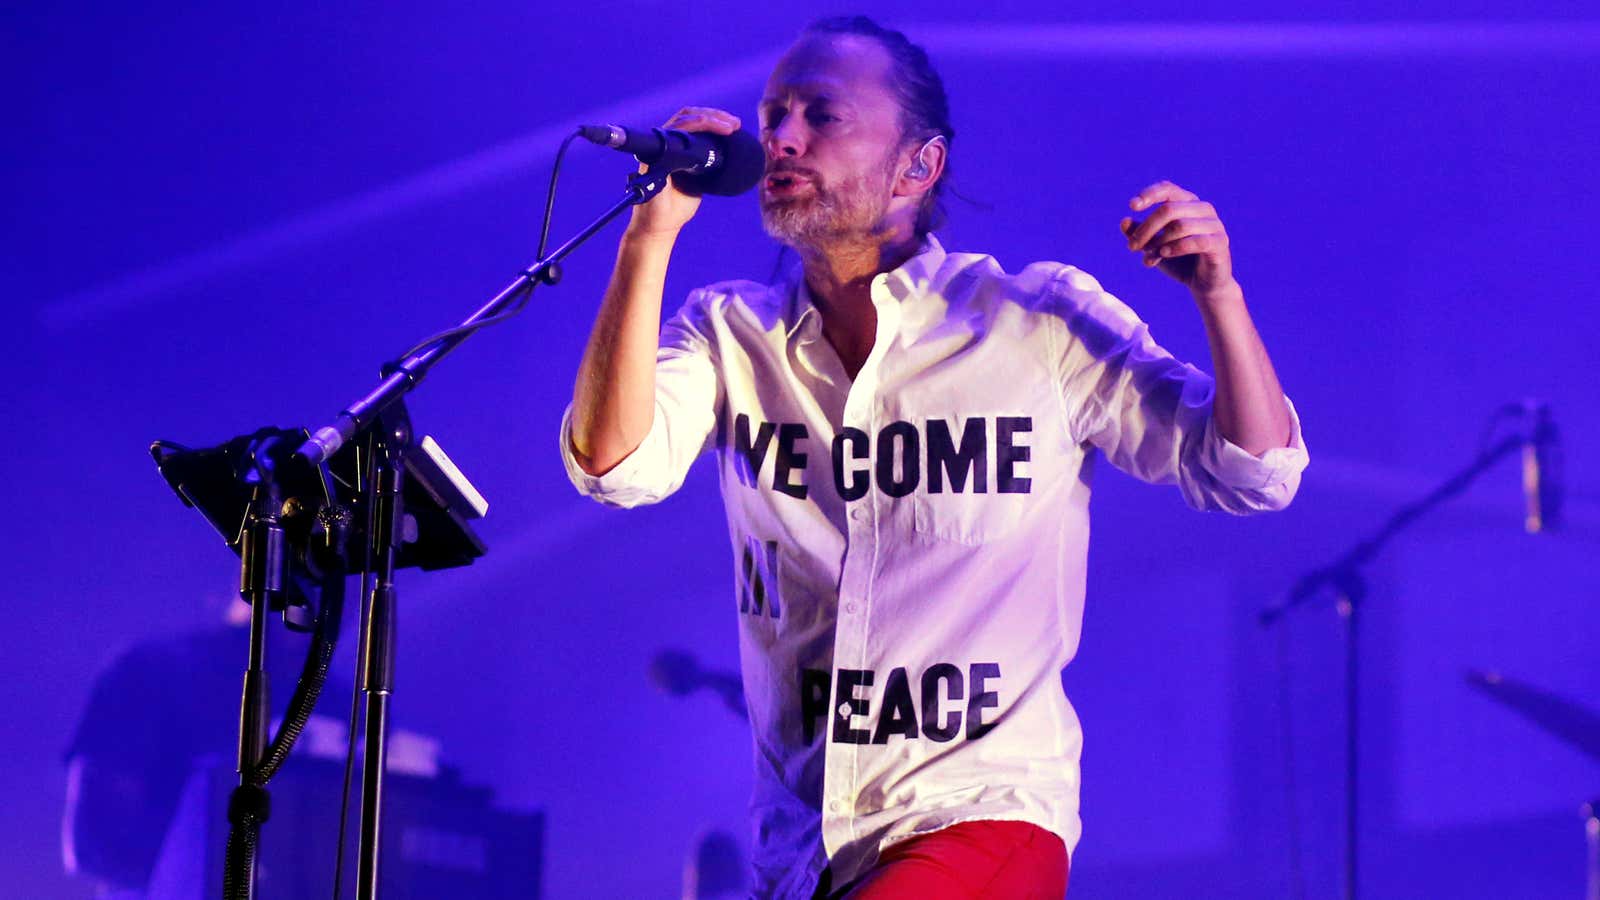 Thom Yorke isn’t targeting his peaceful message at Spotify.